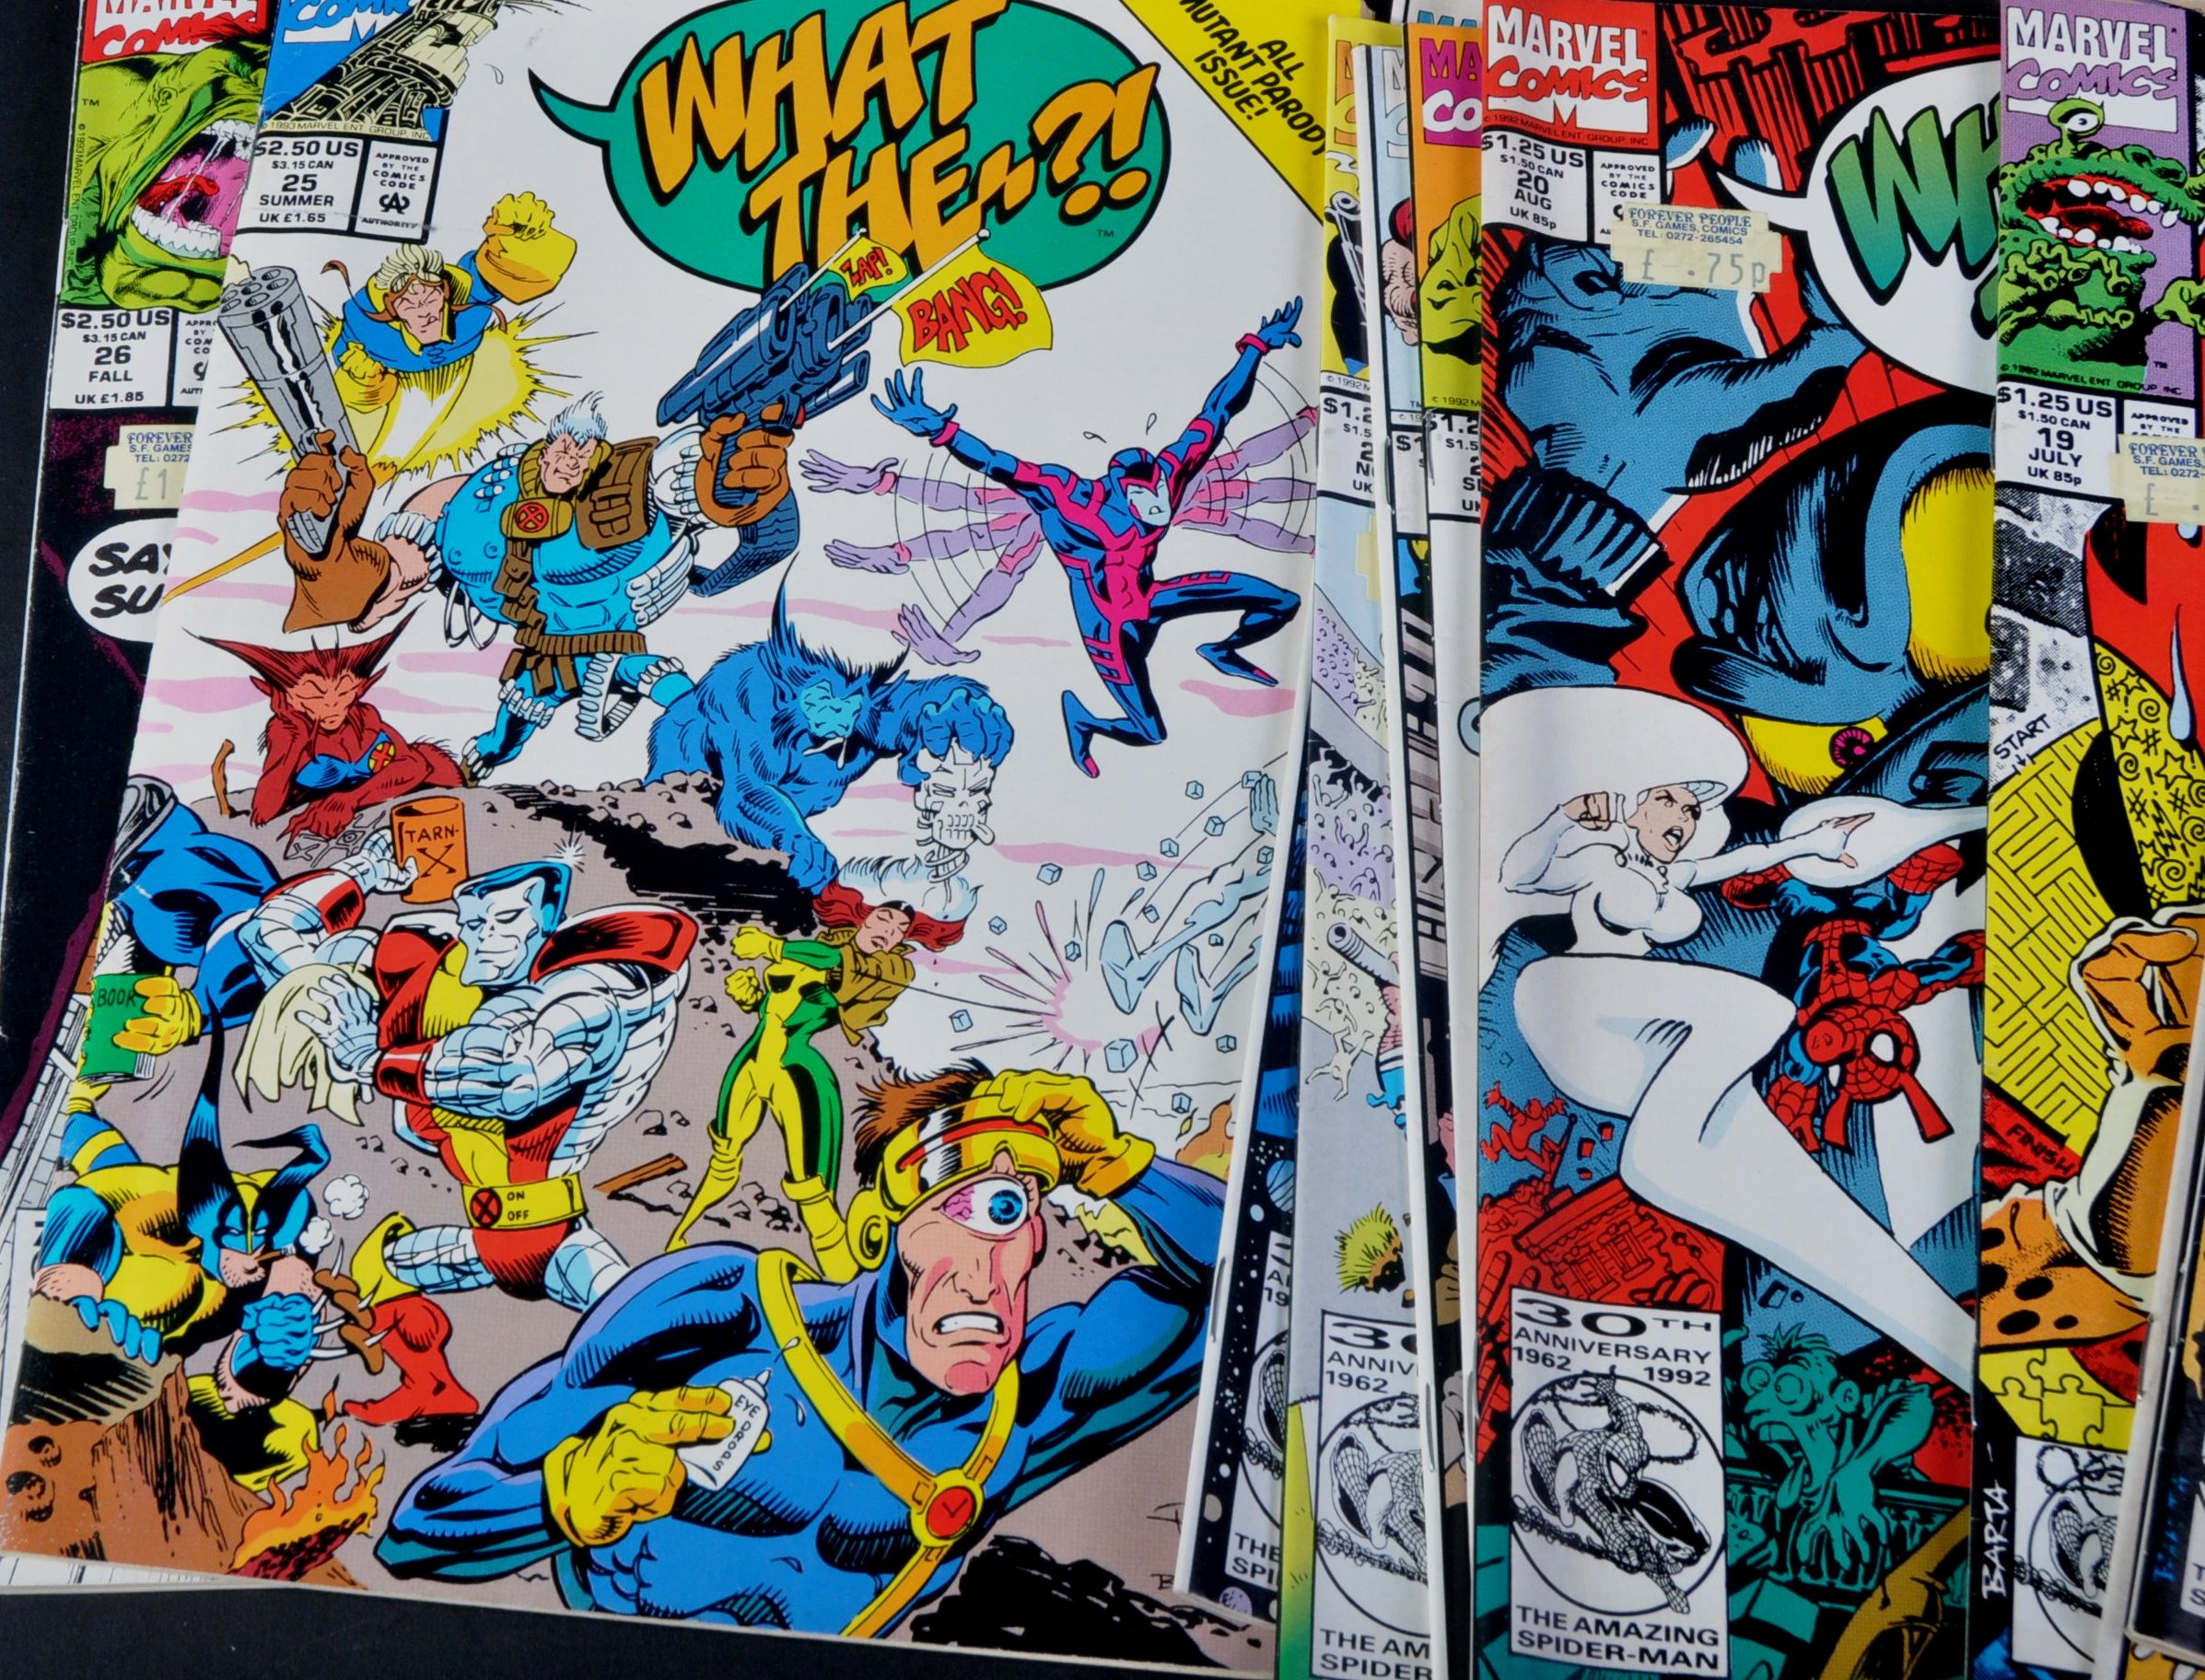 MARVEL COMICS - WHAT THE ..?! - COMPLETE RUN OF COMIC BOOKS - Image 5 of 6